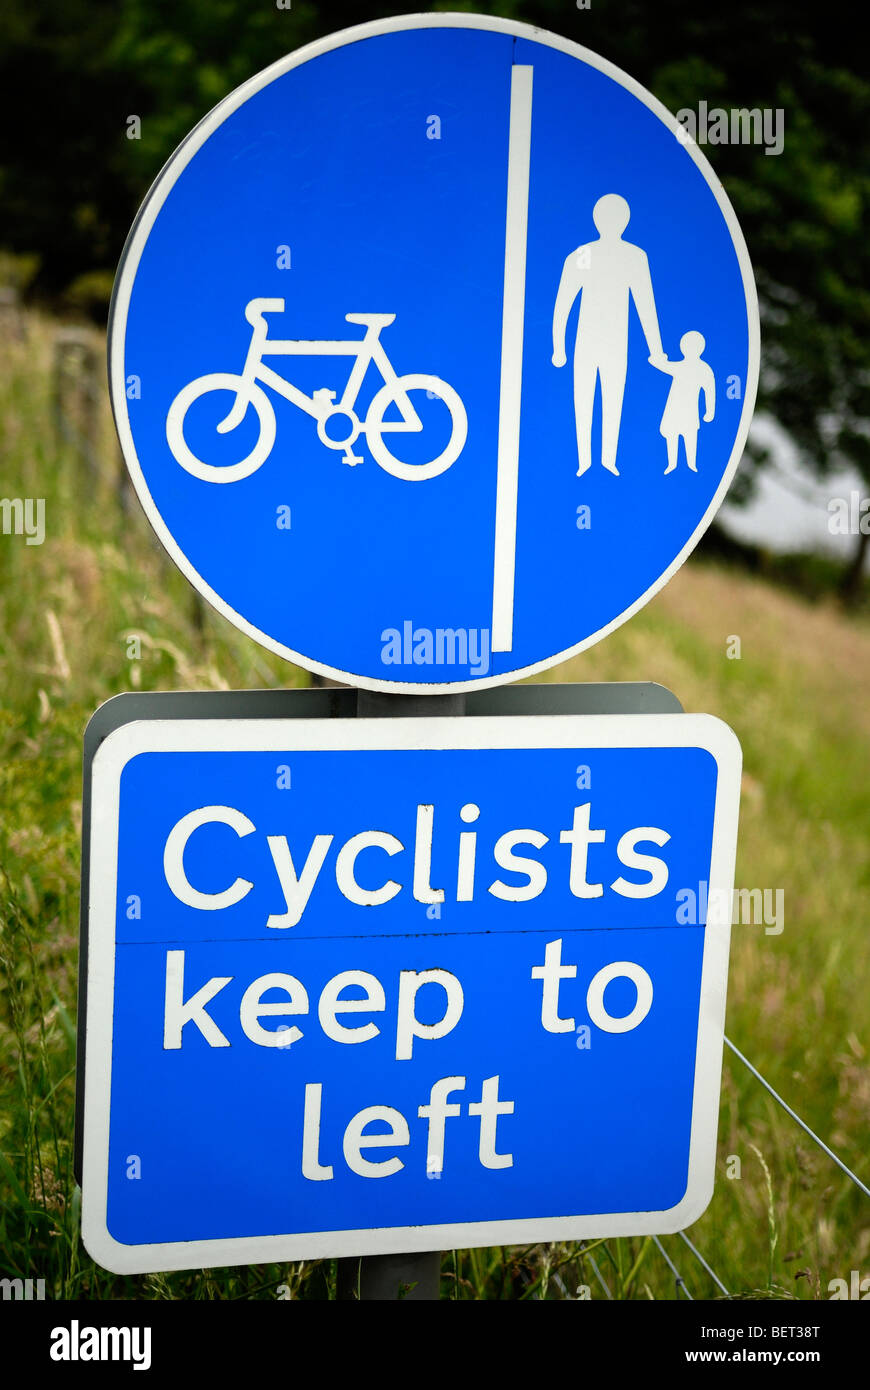 Cyclists Keep Left road sign - blue Stock Photo